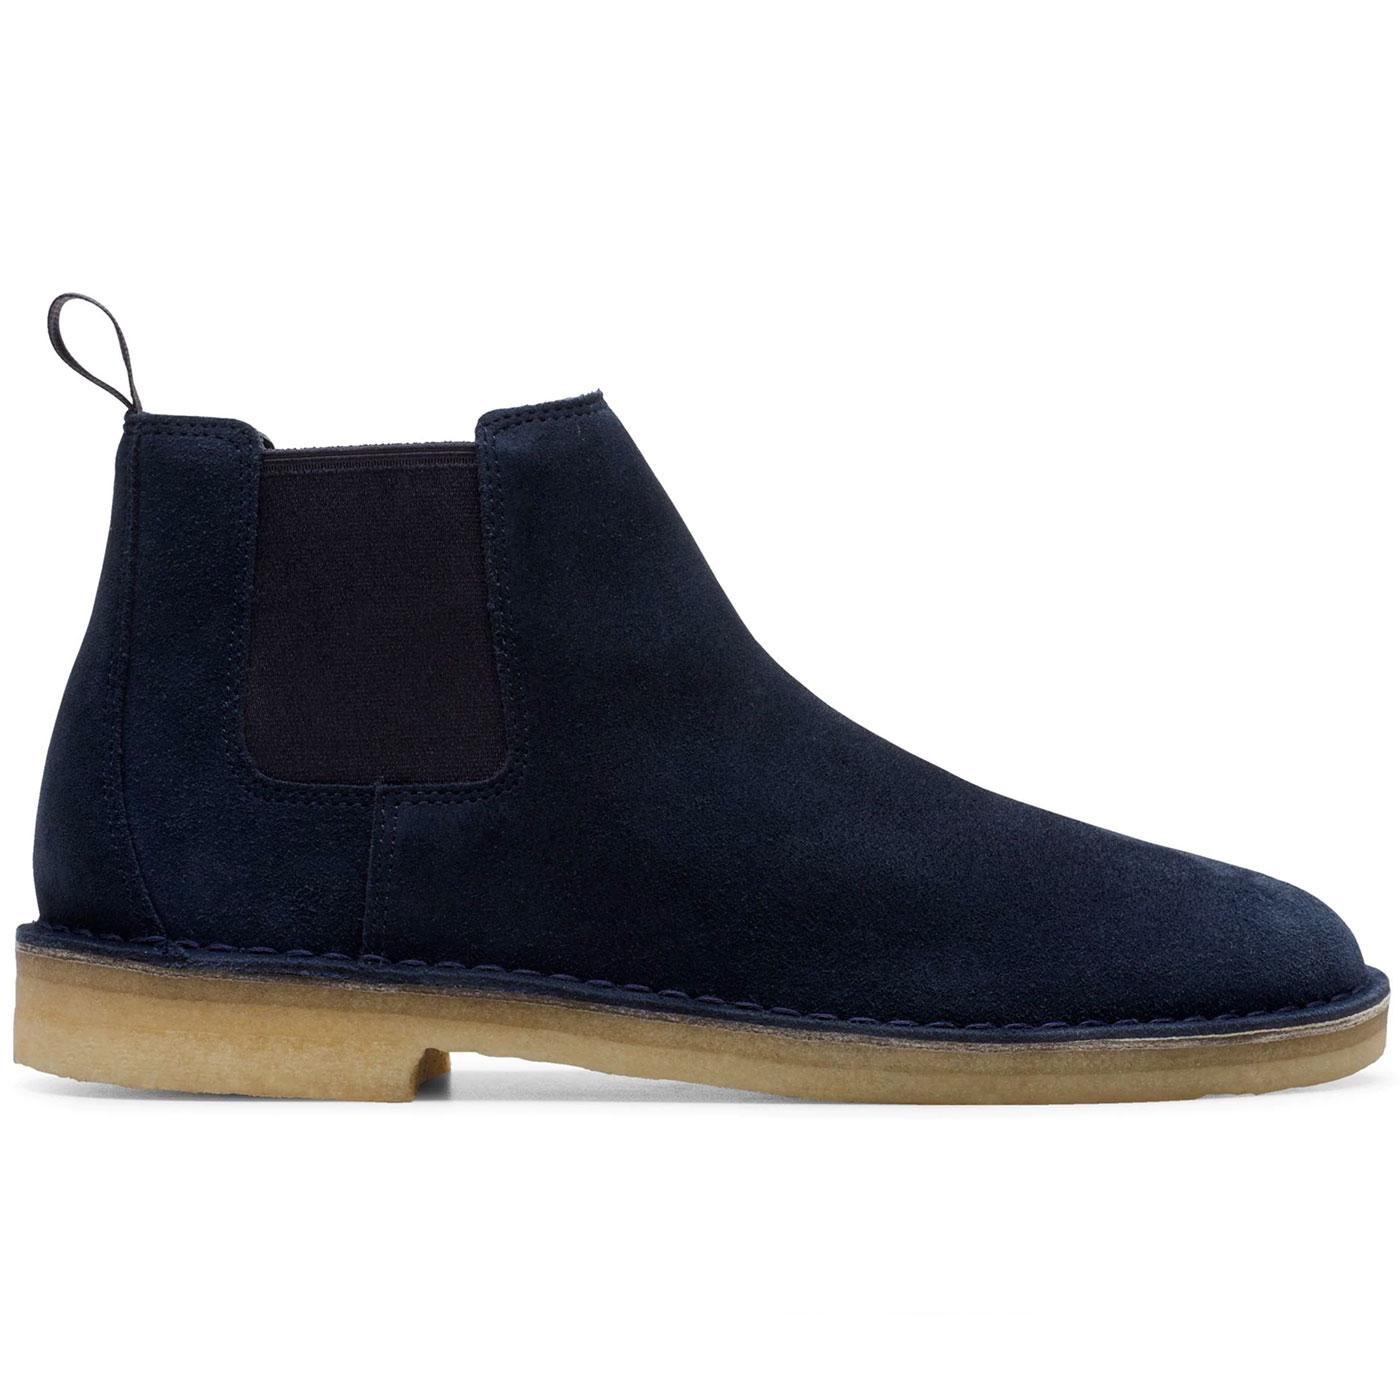 clarks navy boots